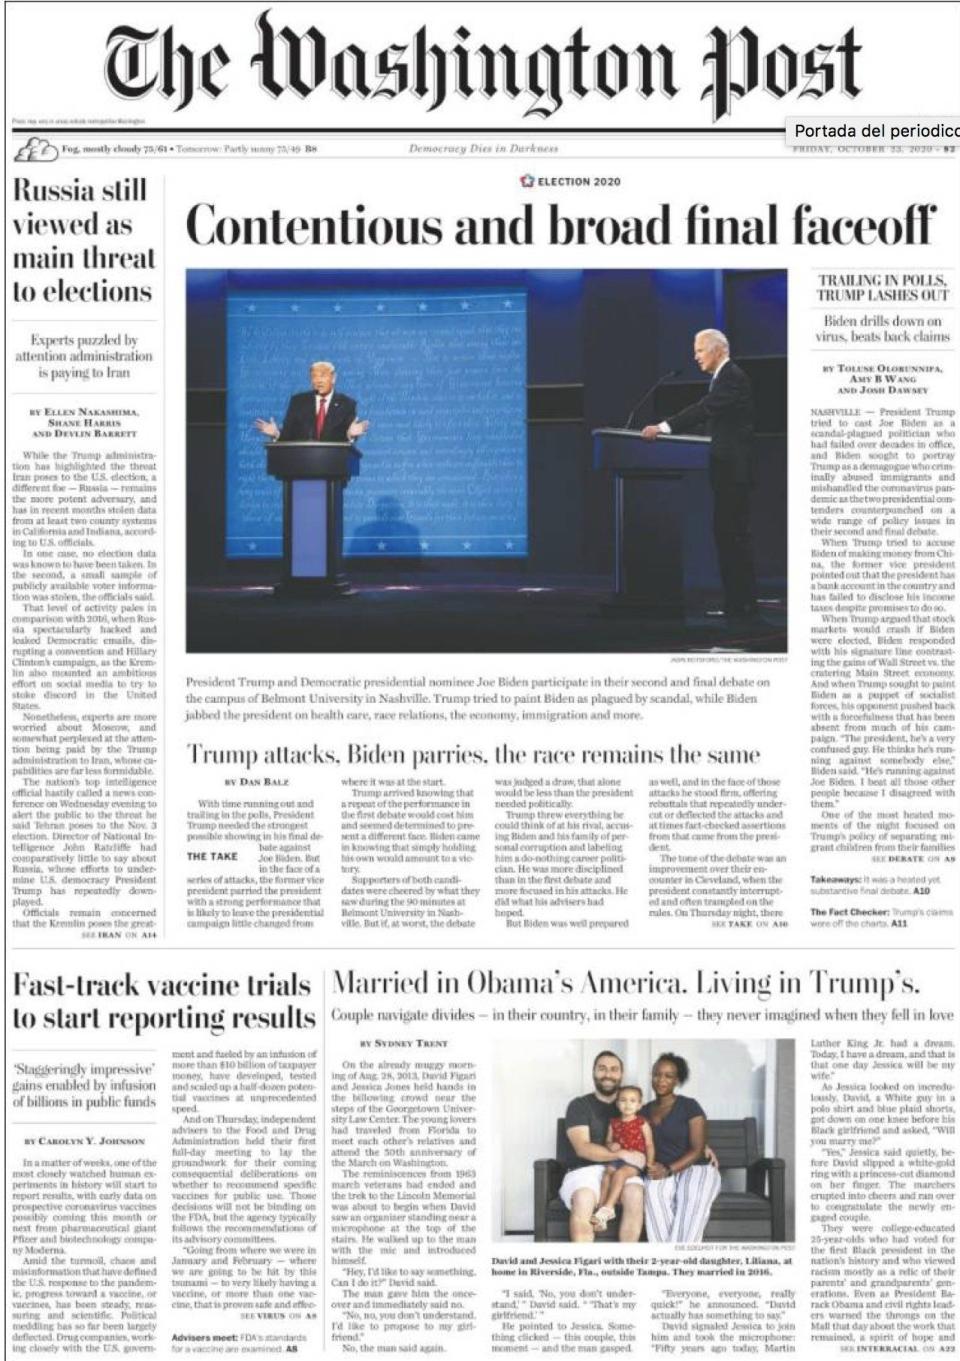 The front page of the Washington Post on Friday